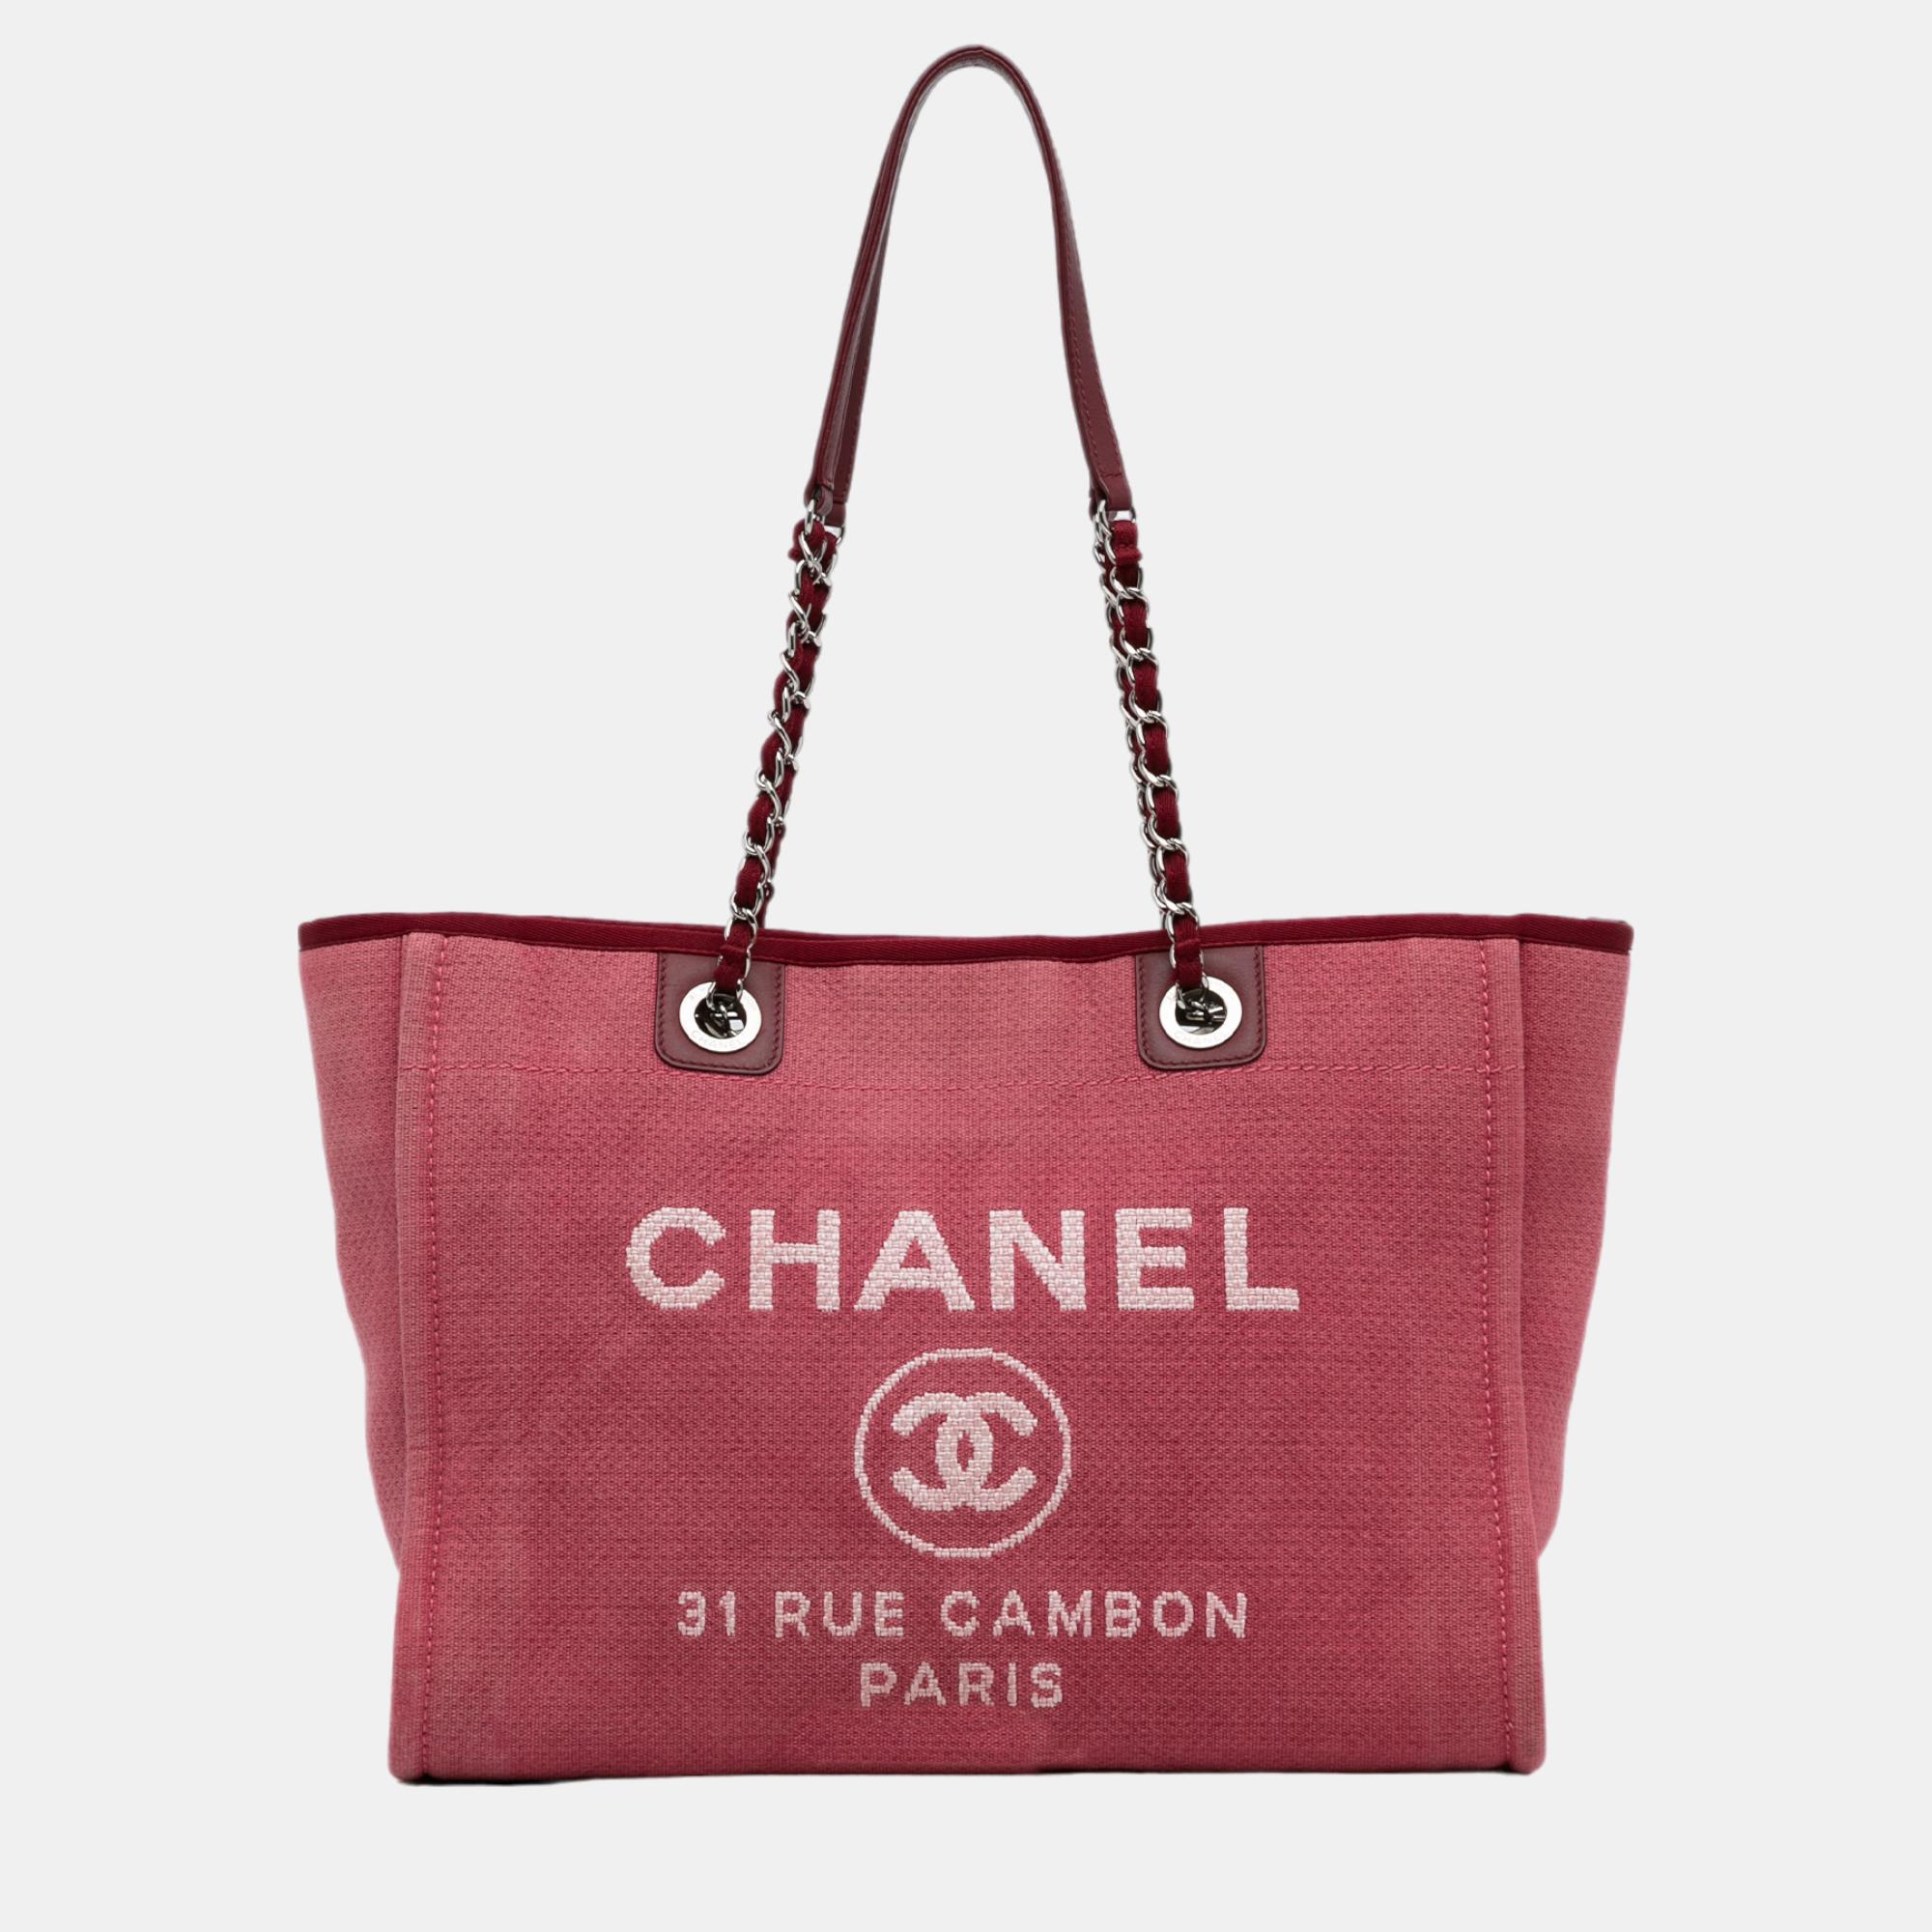 Chanel Red Deauville Tote